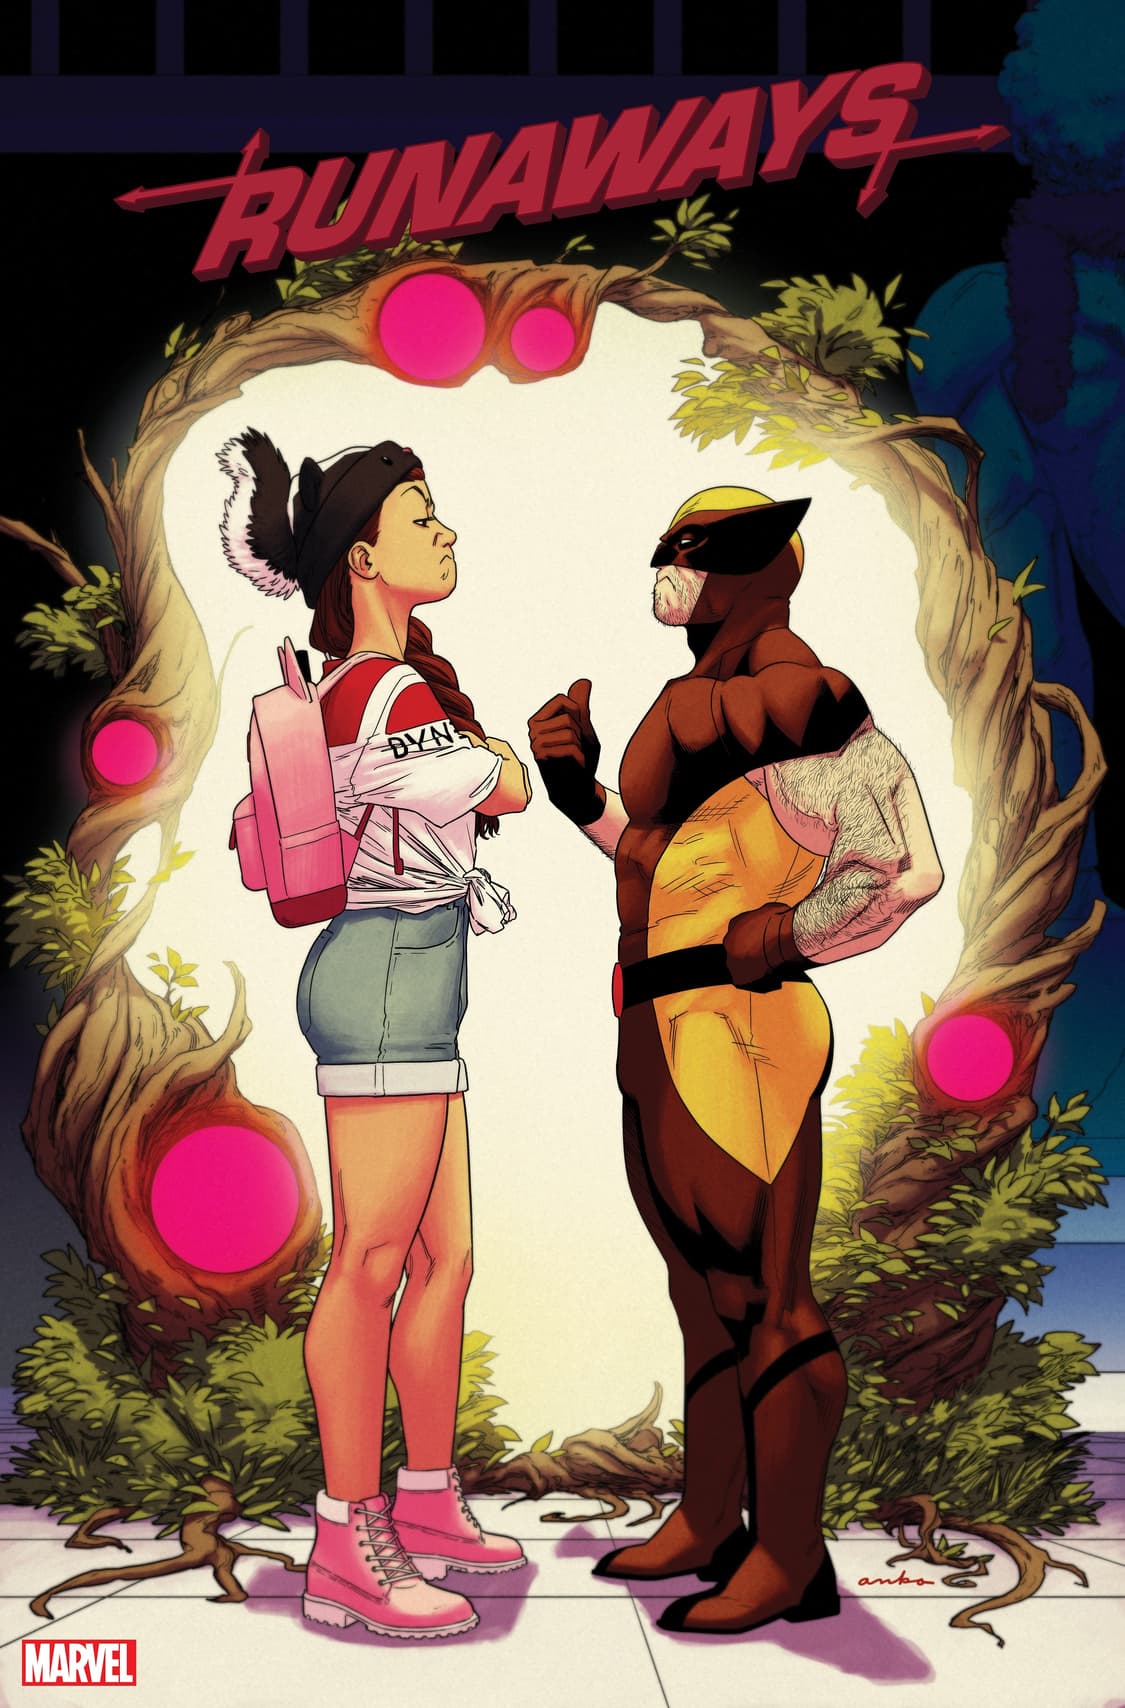 Runaways #34 Written by Rainbow Rowell with Art by Andres Genolet and Cover by Kris Anka